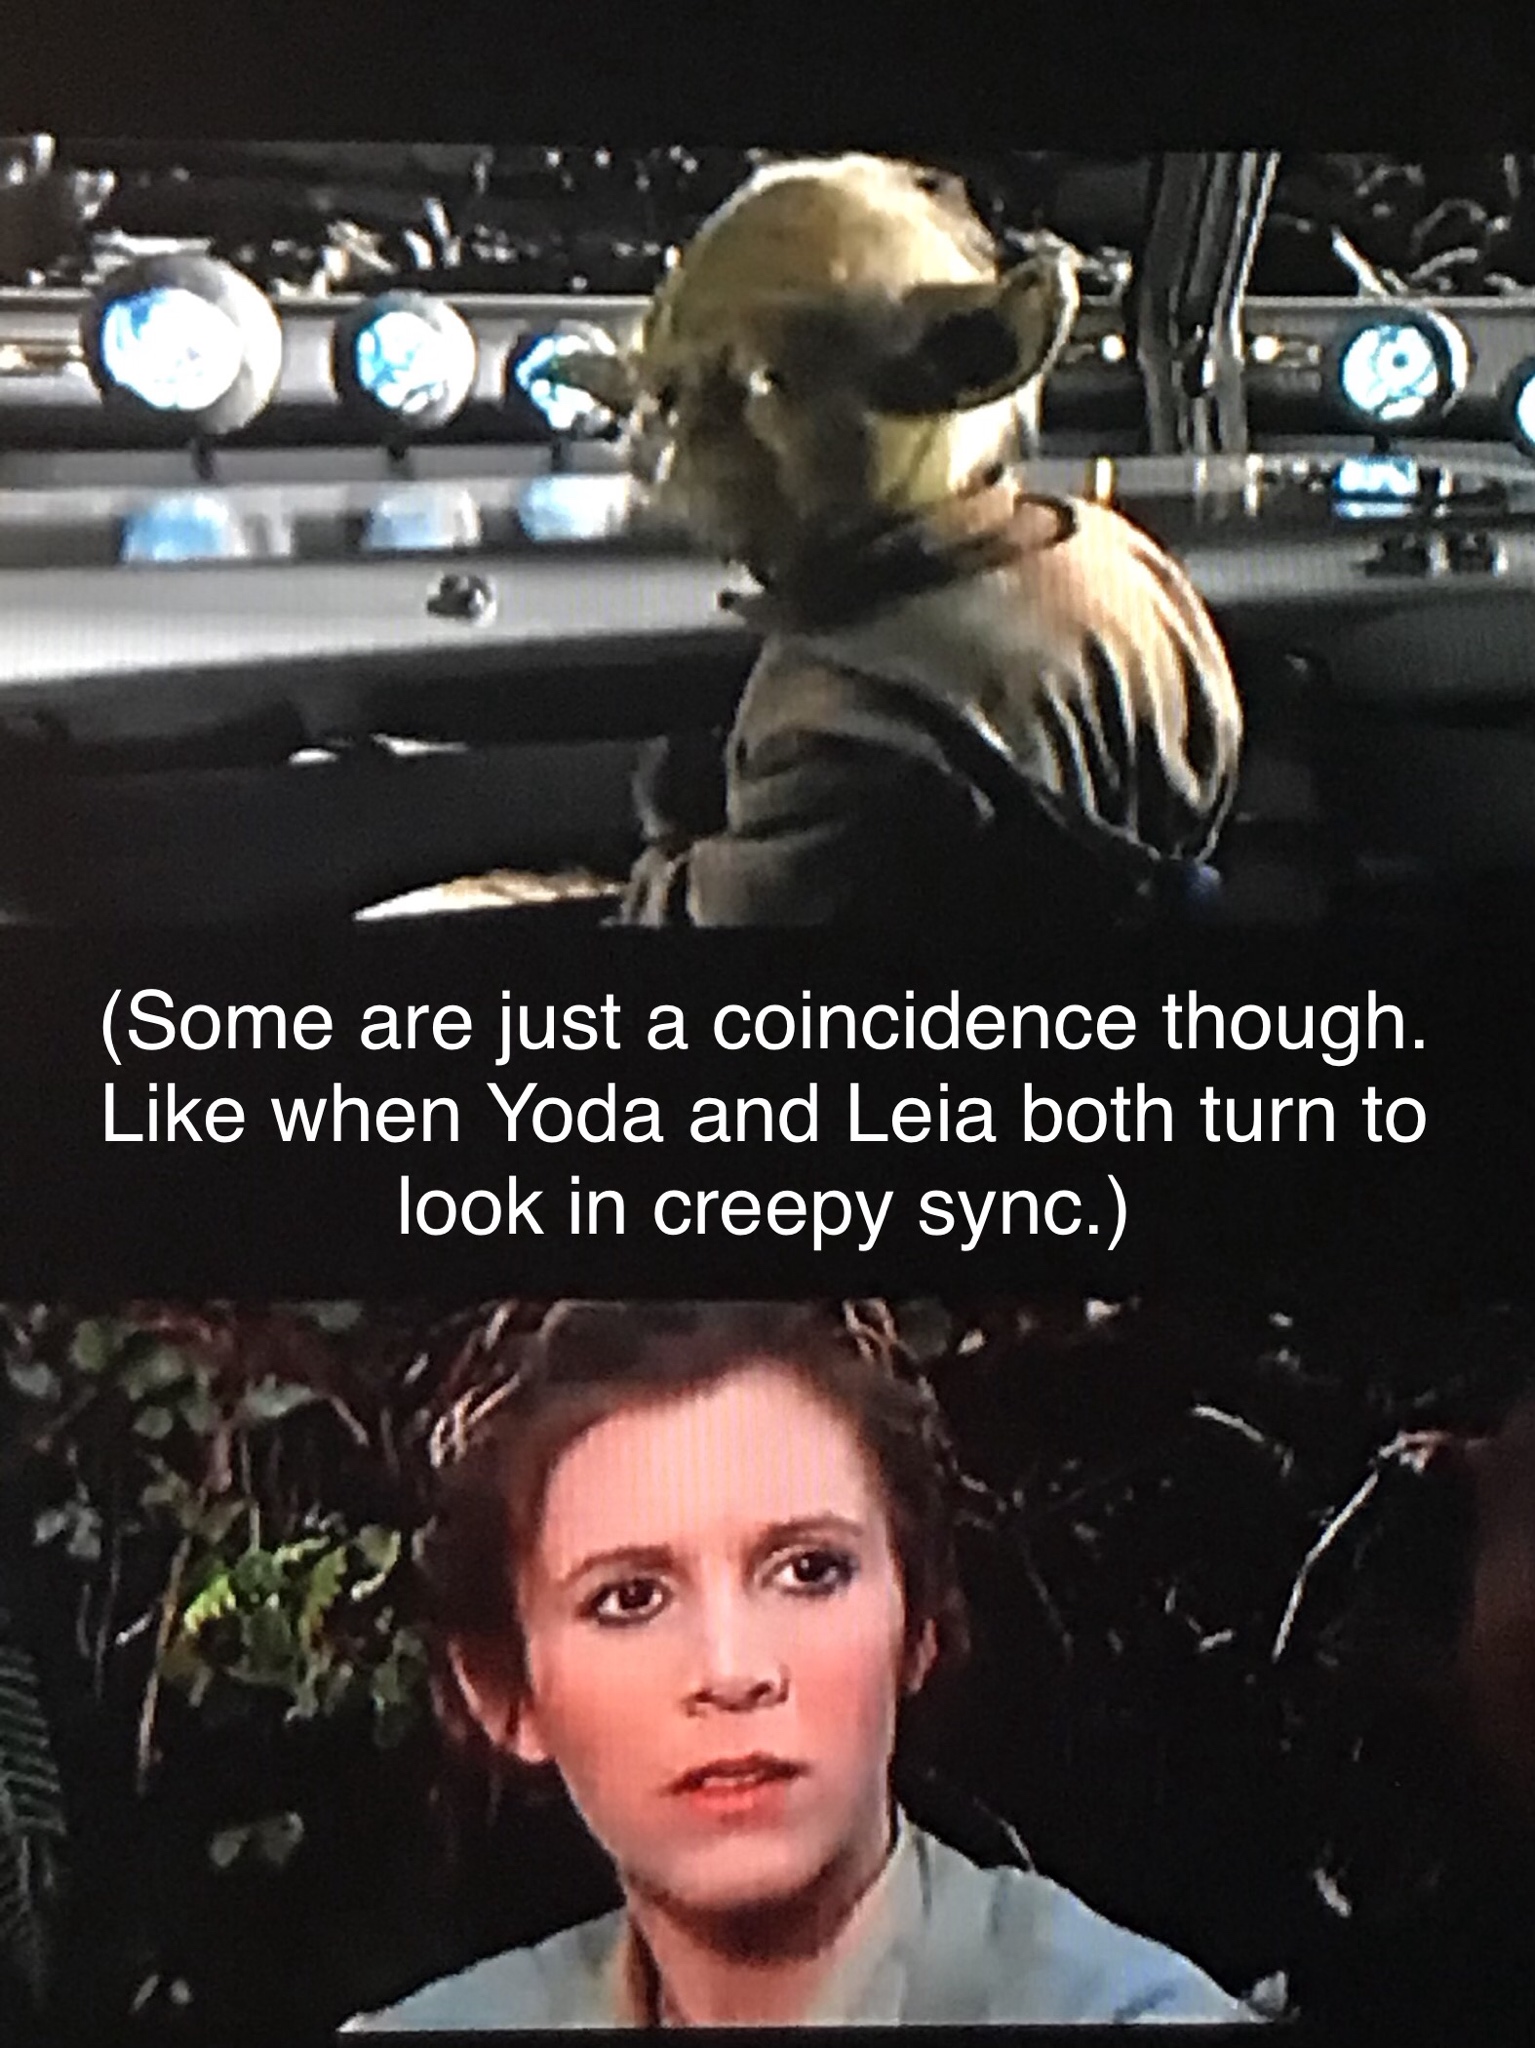 photo caption - Some are just a coincidence though. when Yoda and Leia both turn to look in creepy sync.